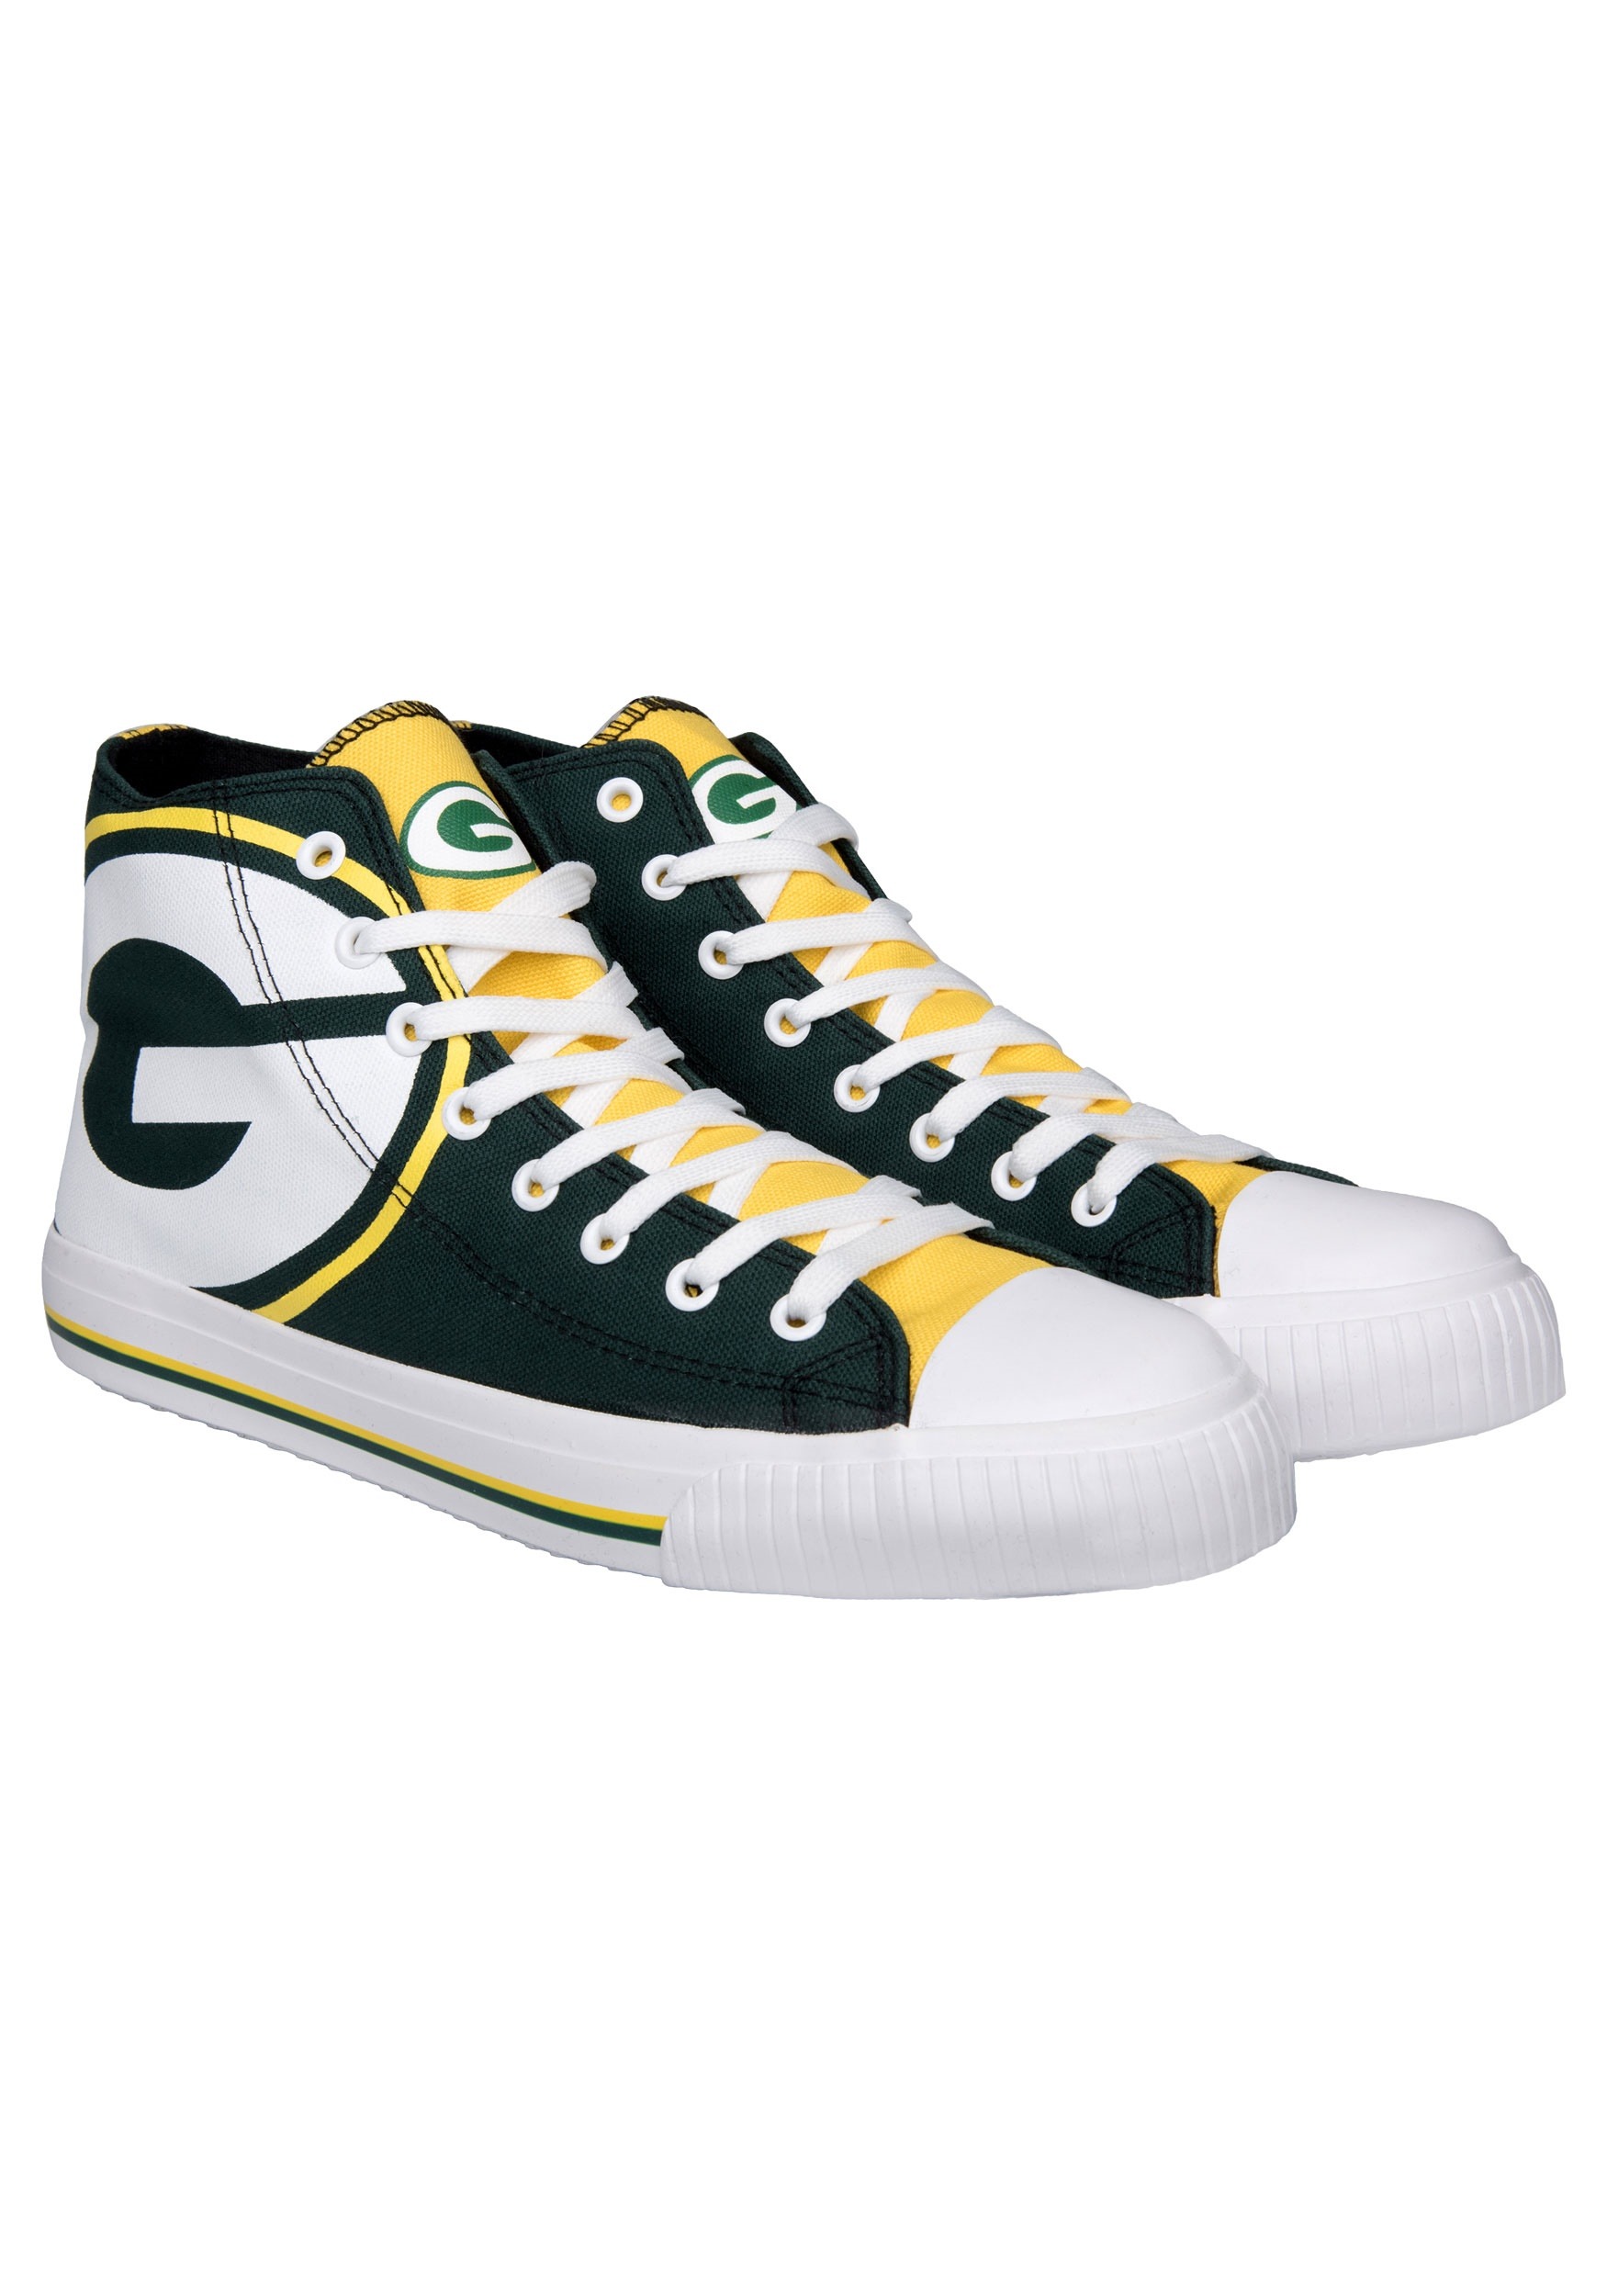 Littlearth Green Bay Packers Canvas Sneaker Lace Up Football Team Logo Shoes High Top Casual Sneaker Flat Classic Comfortable Walking Shoes for Unisex Adults 